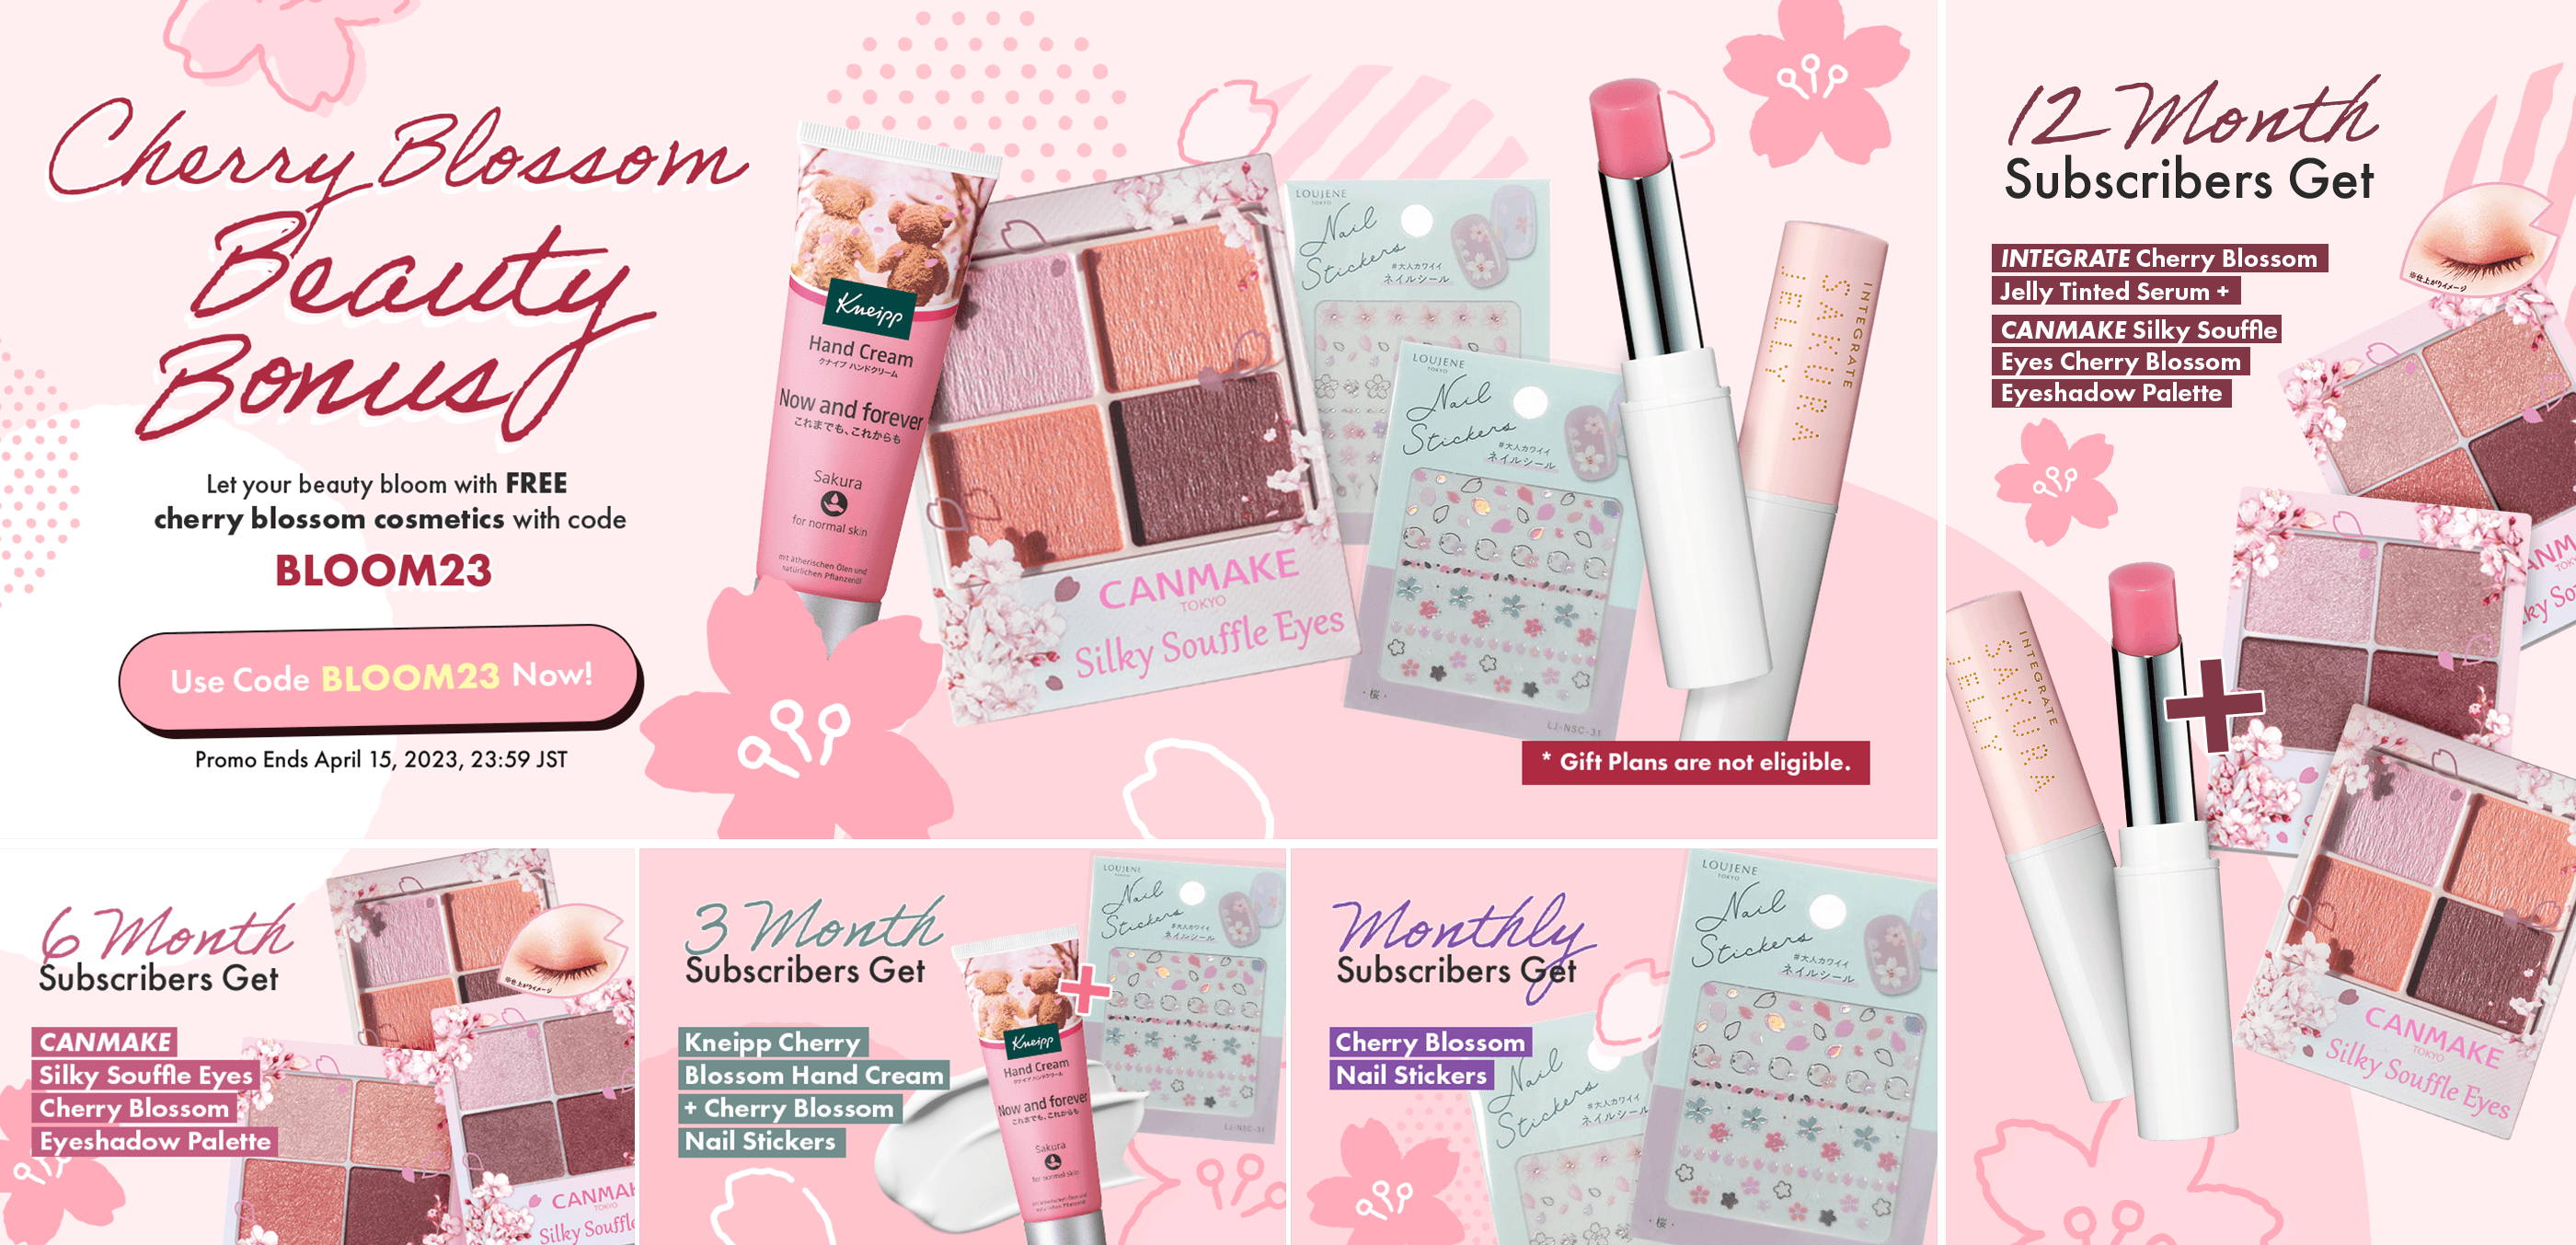 nomakenolife's Cherry Blossom Beauty Bonus promotion that features CANMAKE, INTEGRATE, and other cherry blossom inspired cosmetics